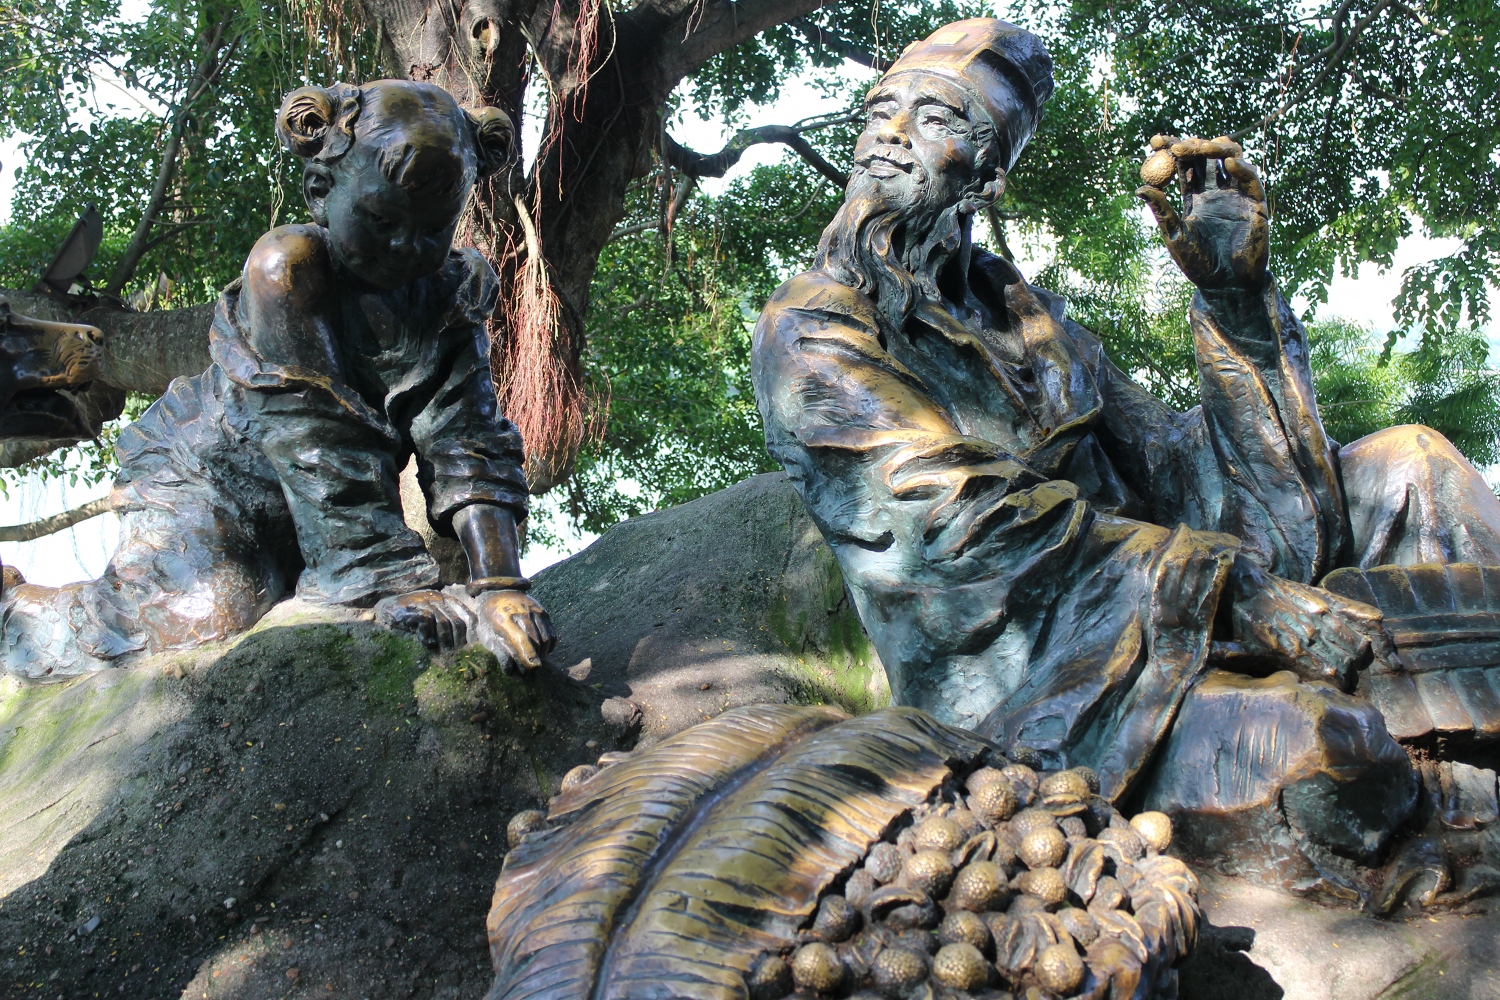 Poet Su Dongpo is immortalised in bronze statues around Huizhou. Image by Thomas Bird / Lonely PlanetPoet Su Dongpo is immortalised in bronze statues around Huizhou. Image by Thomas Bird / Lonely Planet